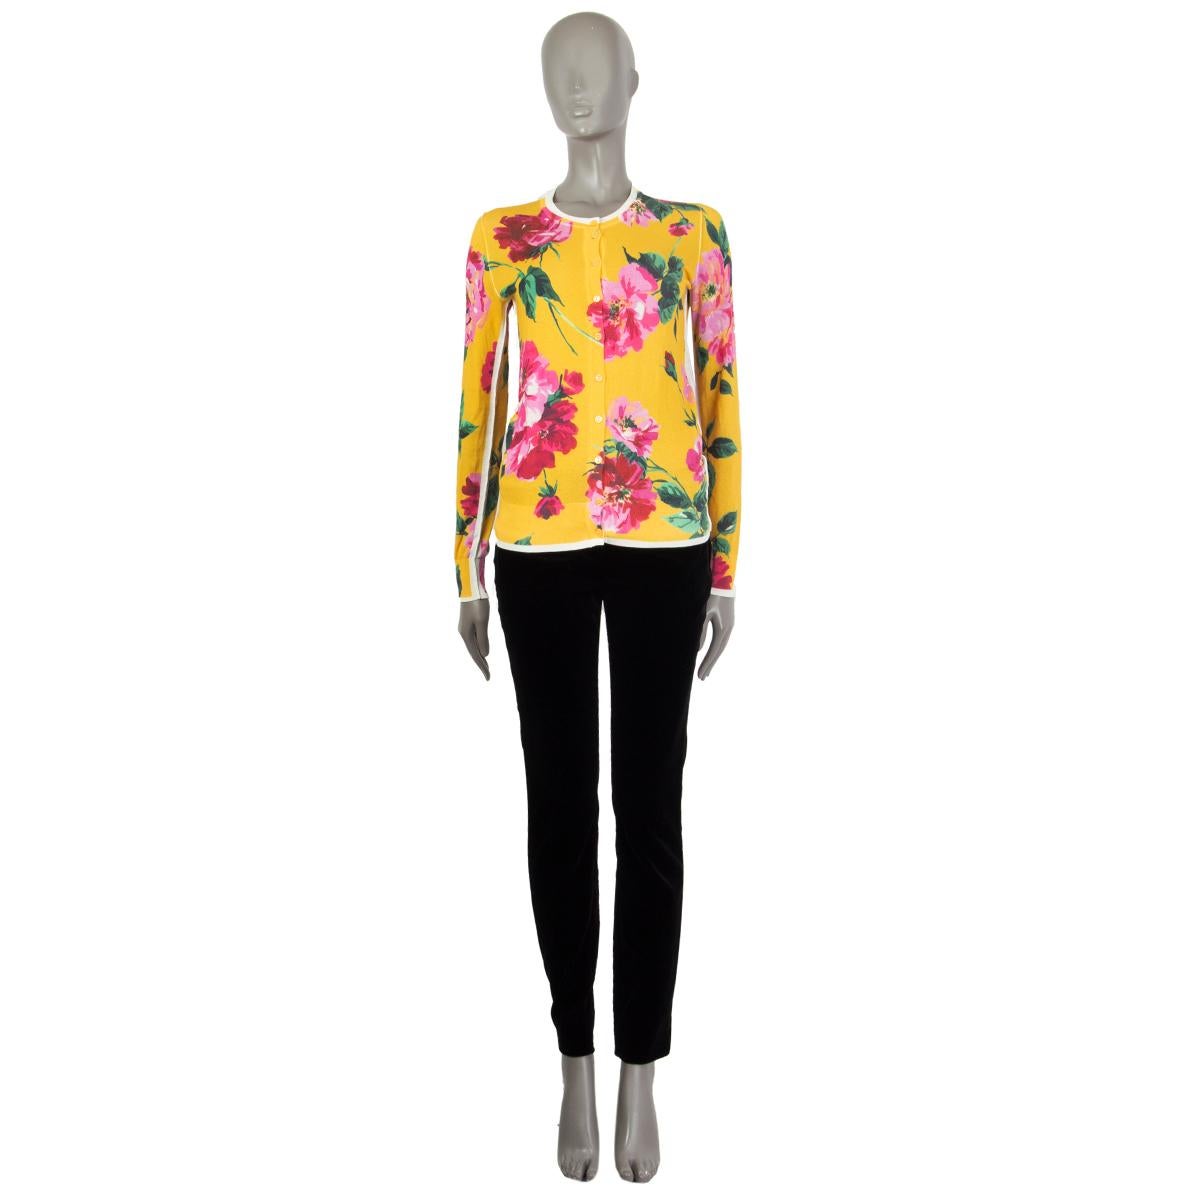 100% authentic Dolce & Gabbana flowered-print cardigan in gold-yellow, magenta, pink, berry, green and off white cotton (100%) with a ribbed crew neck, ribbed cuffs and hem. Unlined. Closes with a button fastening in the front. Has been worn and is